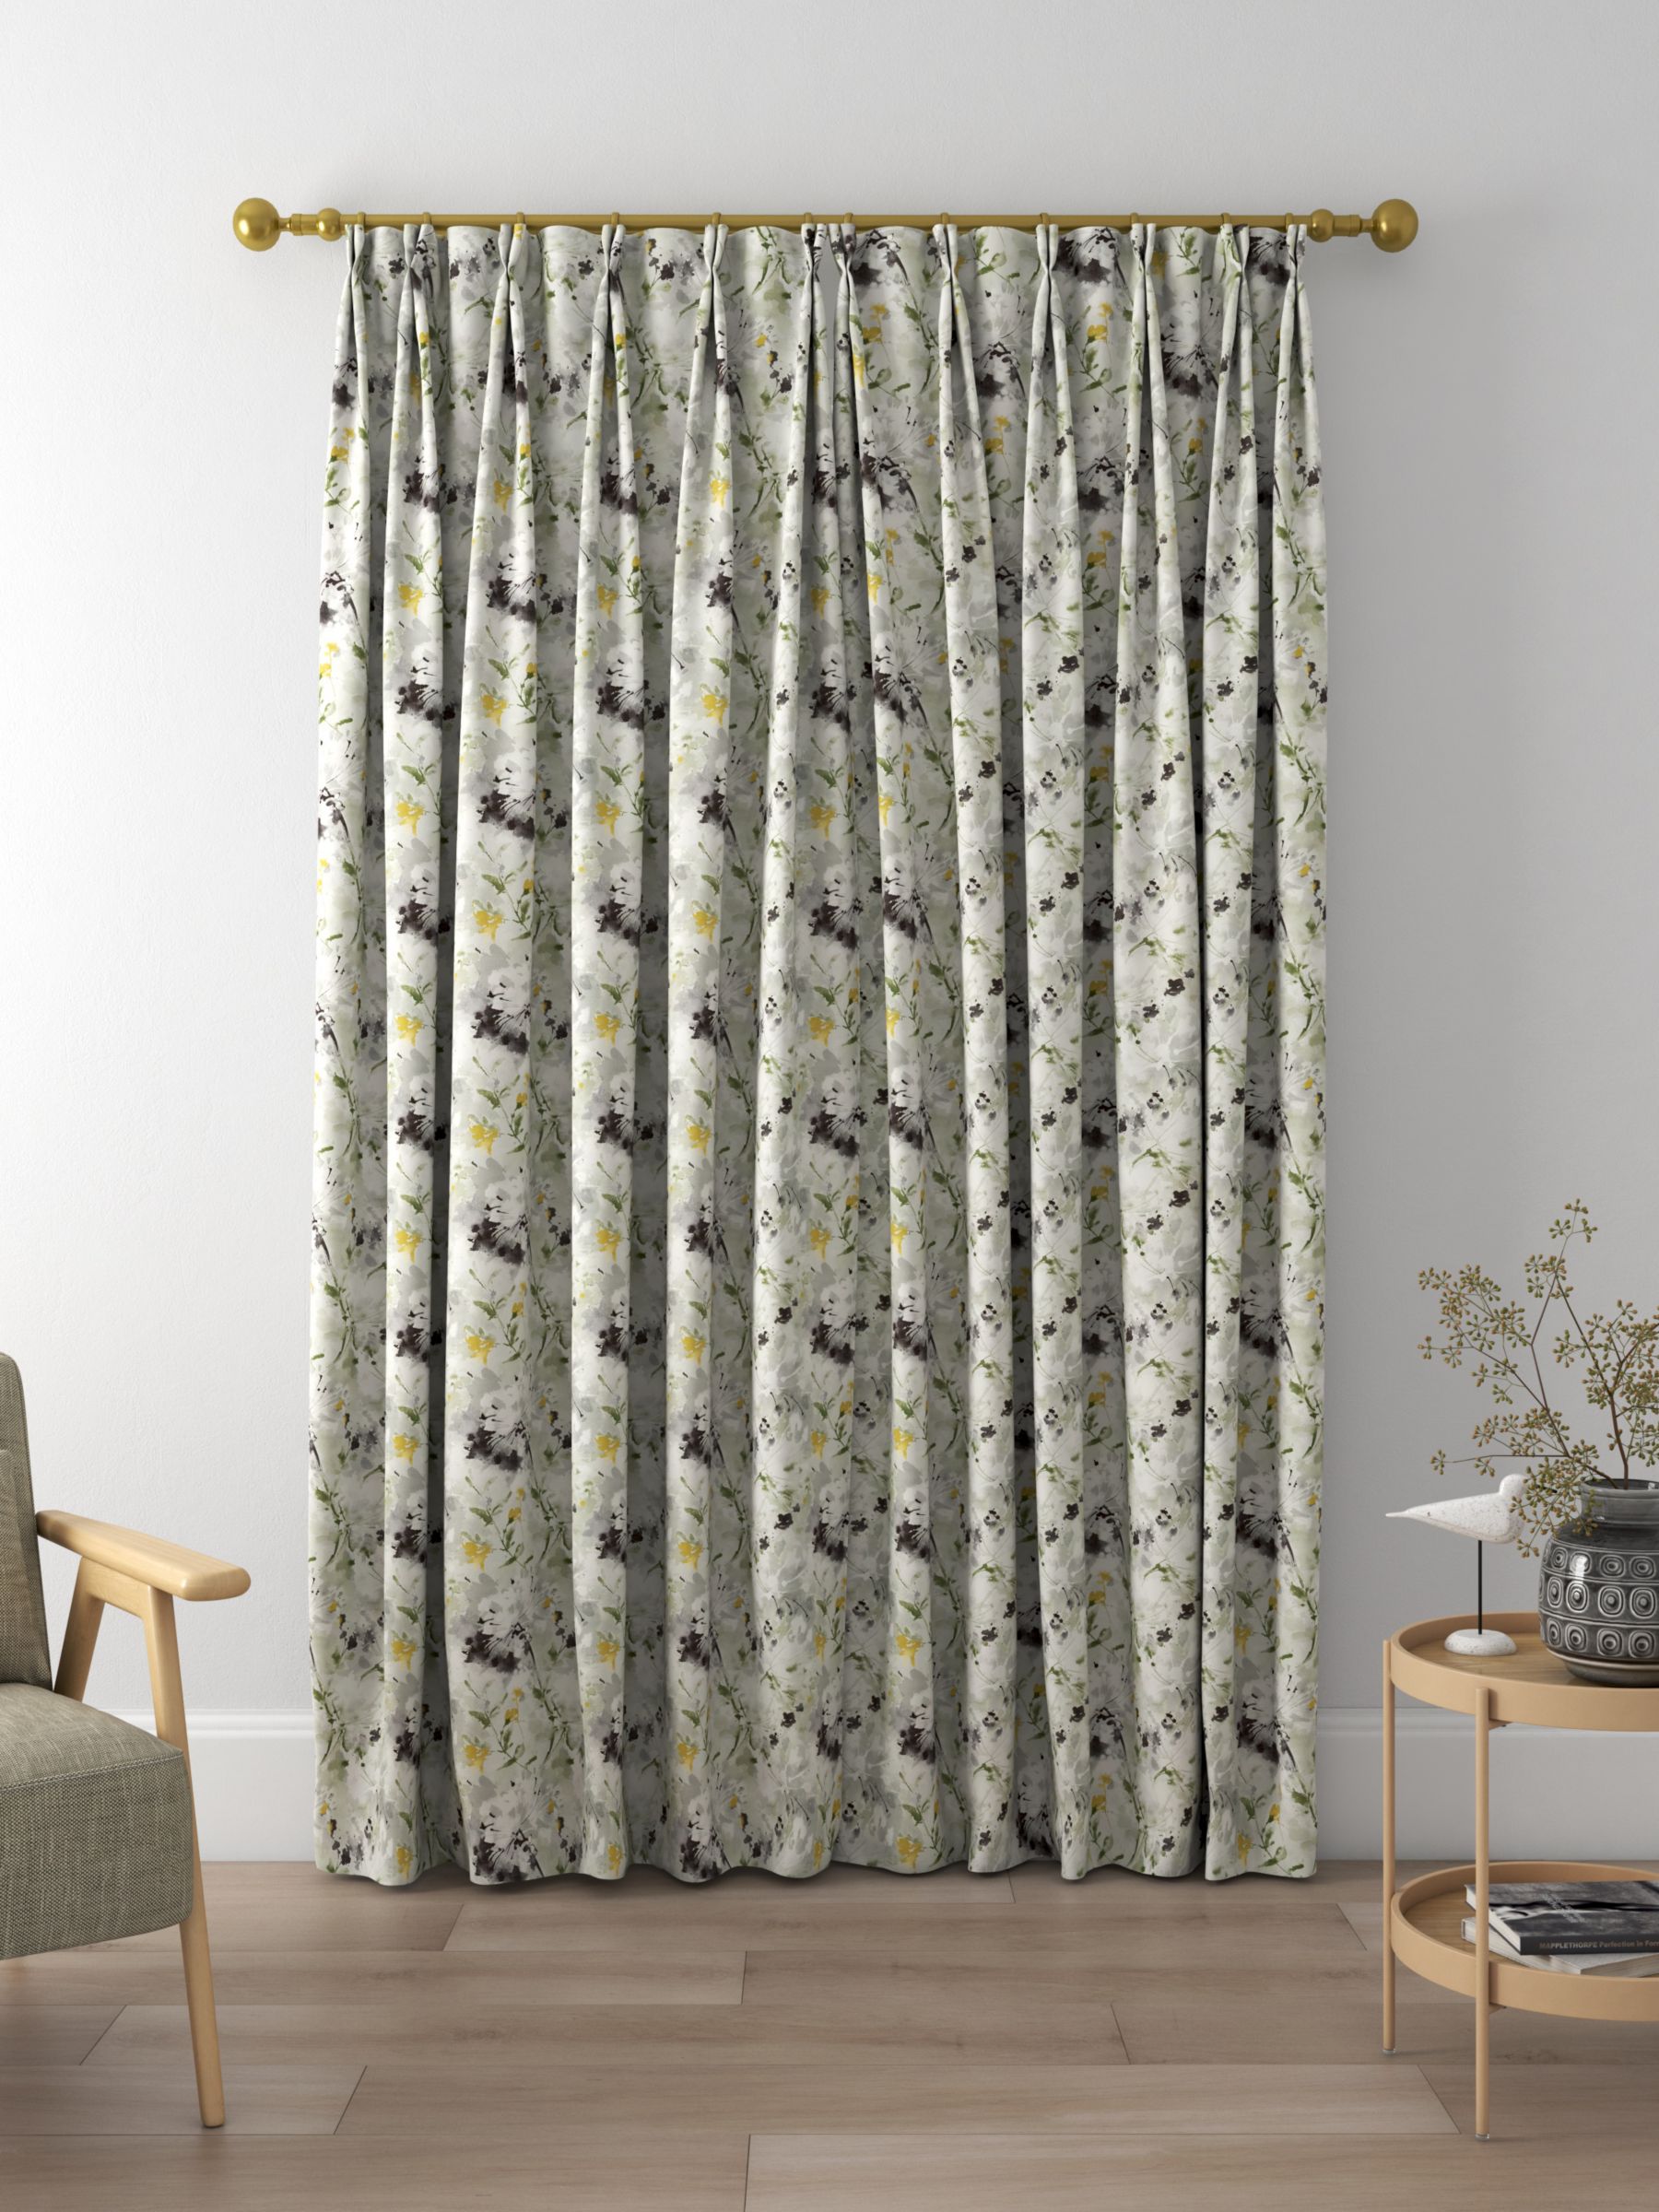 Sanderson Simi Made to Measure Curtains, Pearl